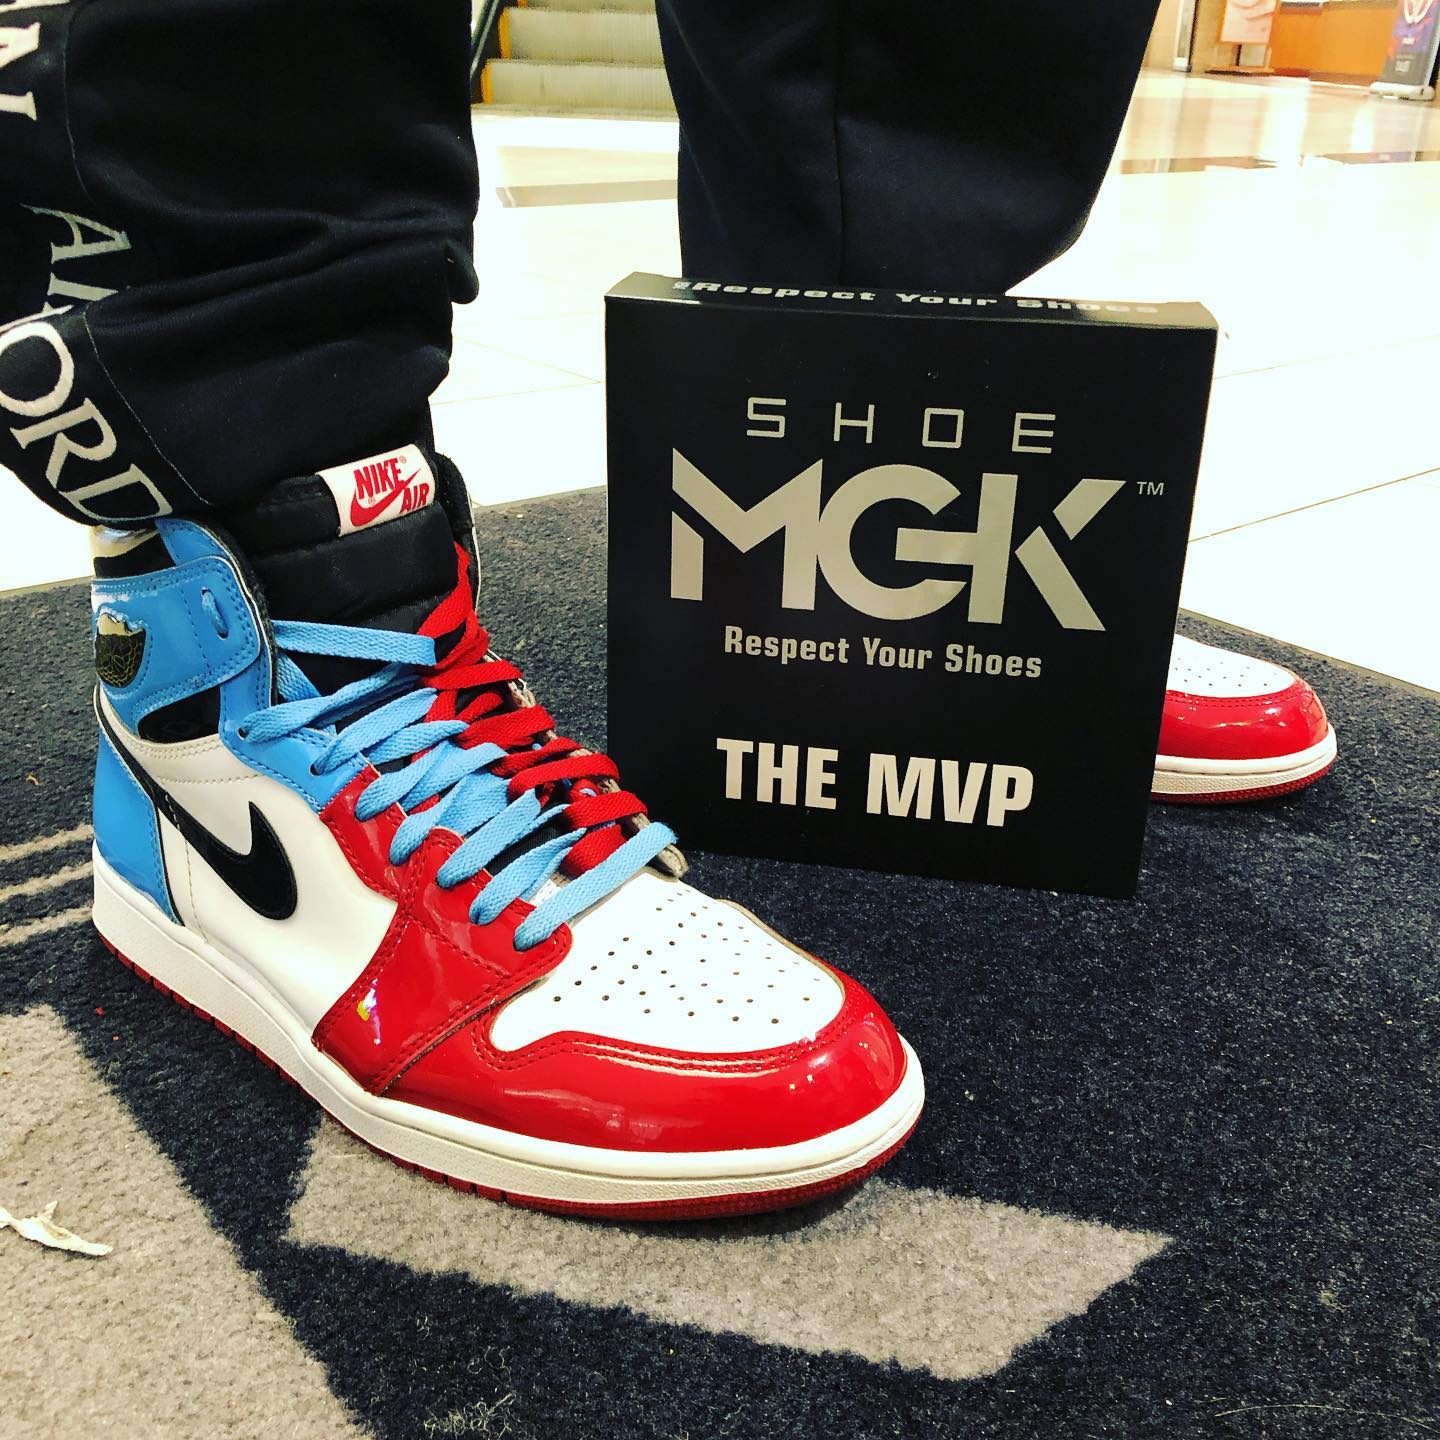 How to Use MGK Shoe Cleaner